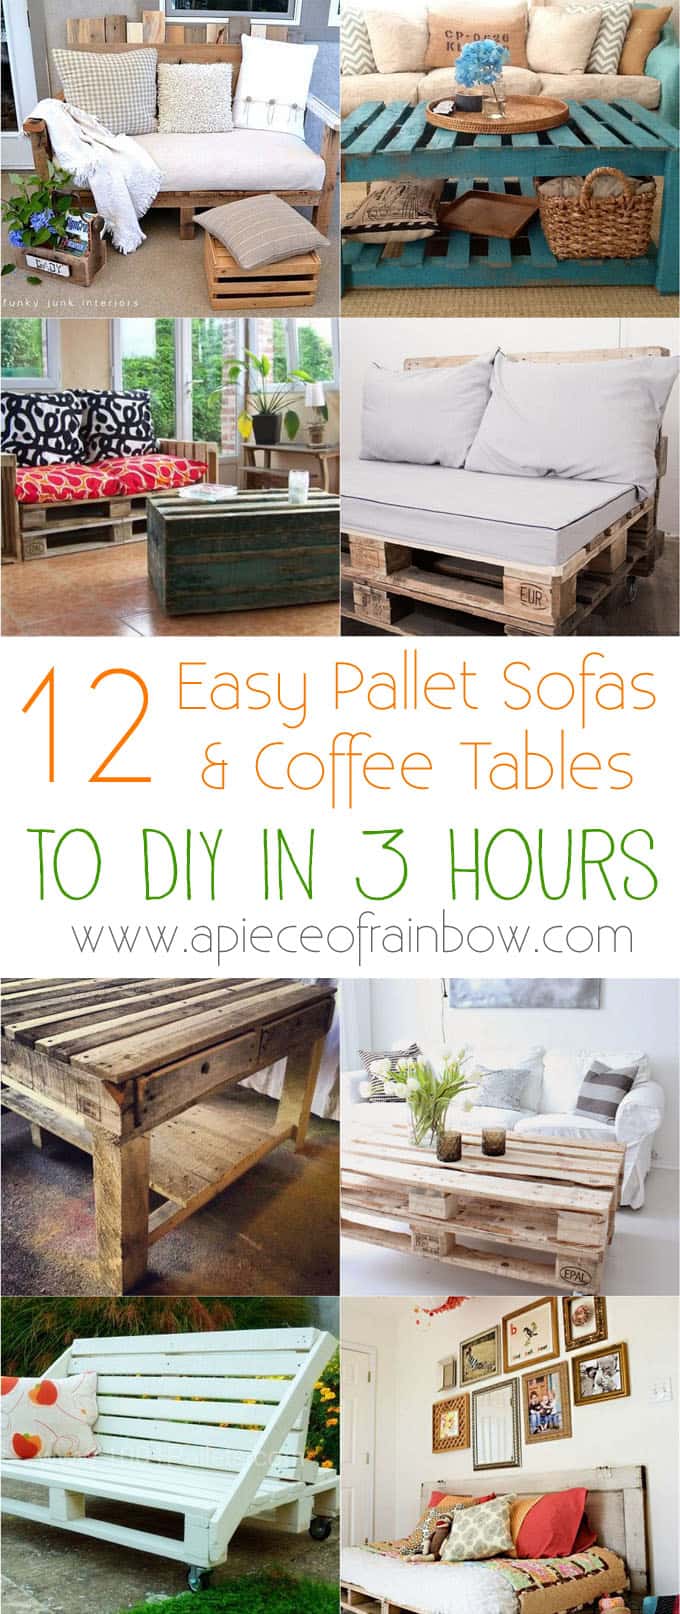 12 Easy Pallet Sofas And Coffee Tables To Diy In One Afternoon A